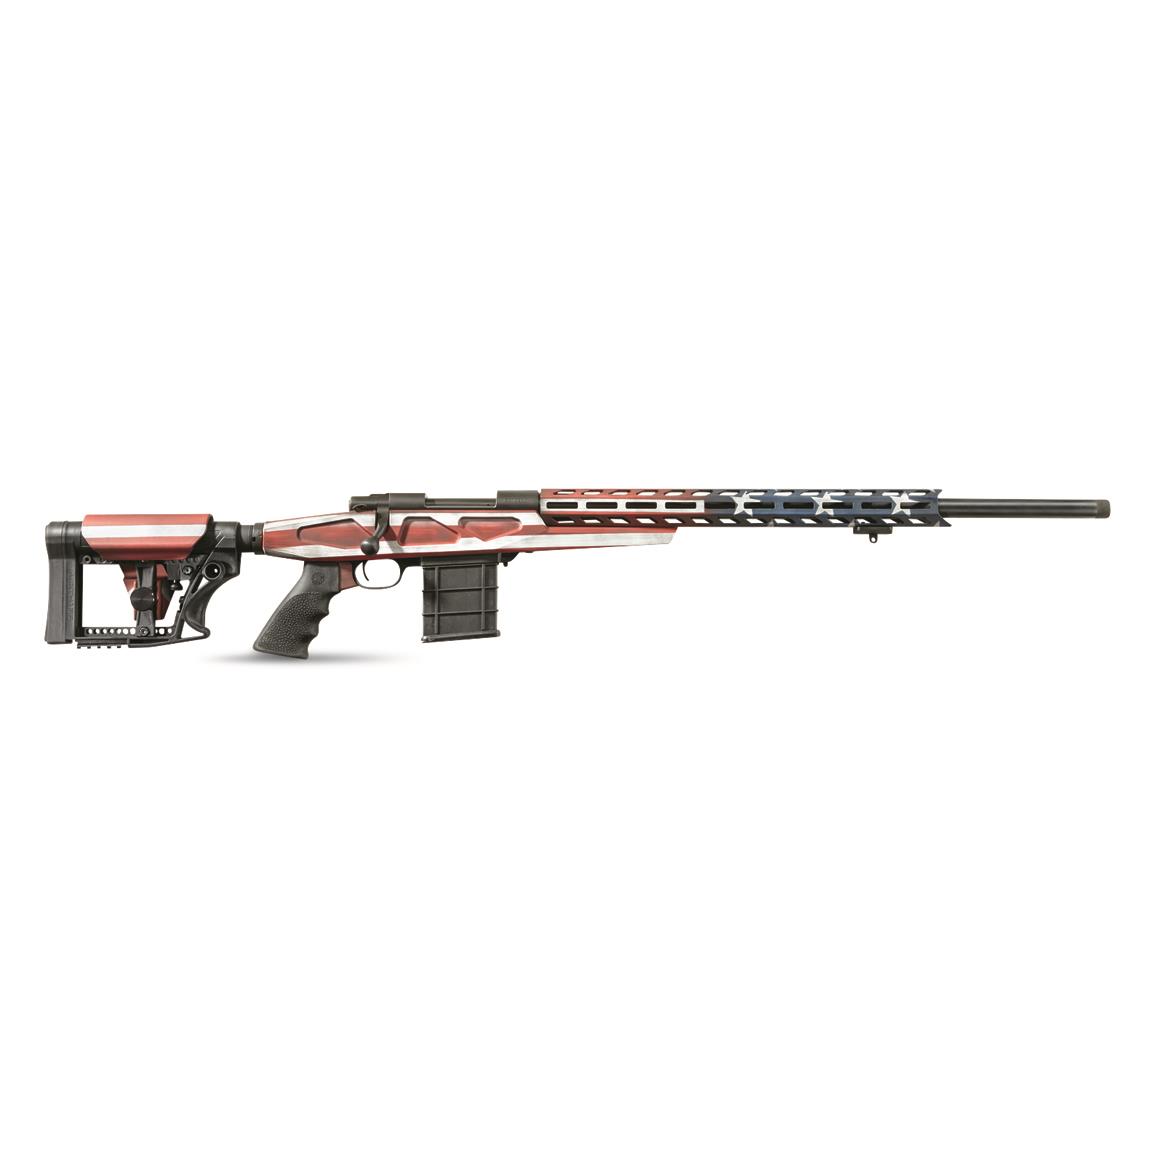 LSI Howa APC Chassis Rifle, Bolt Action, 6.5mm Creedmoor, 24" Barrel, American Flag, 10+1 Rds.